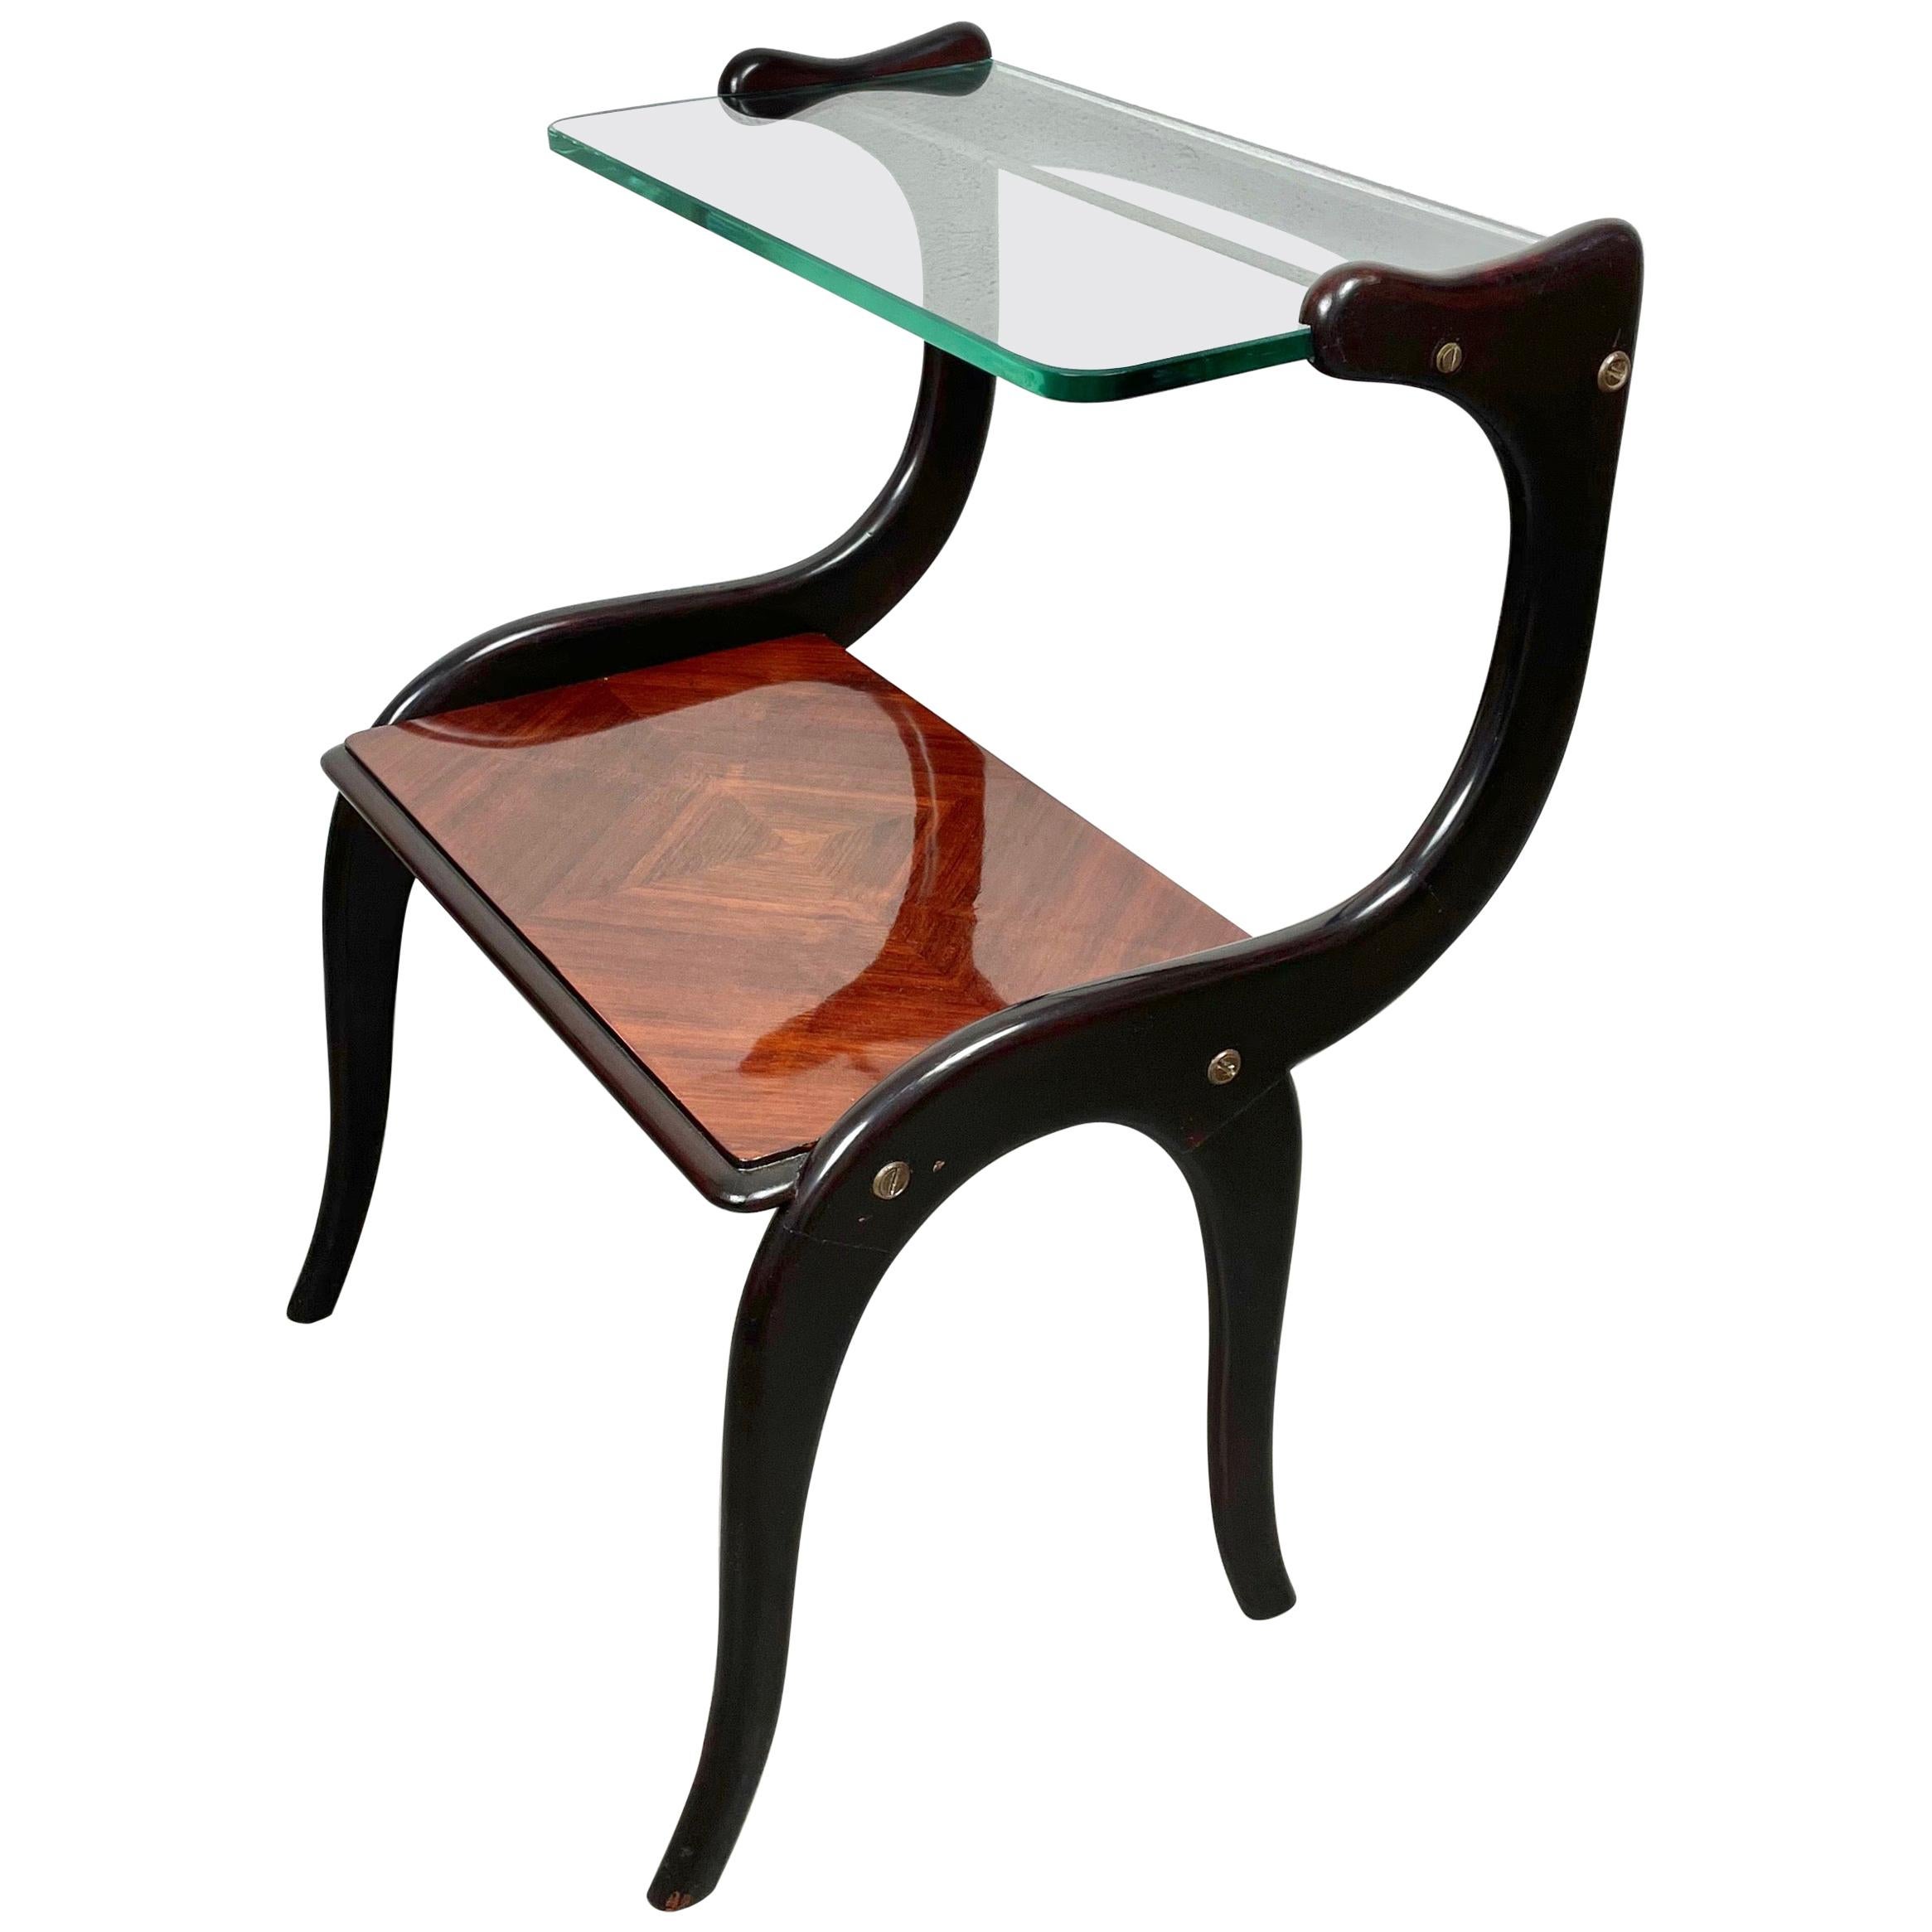 Ebonized Wood and Glass Side Table Attributed to Ico Parisi, Italy, 1950s